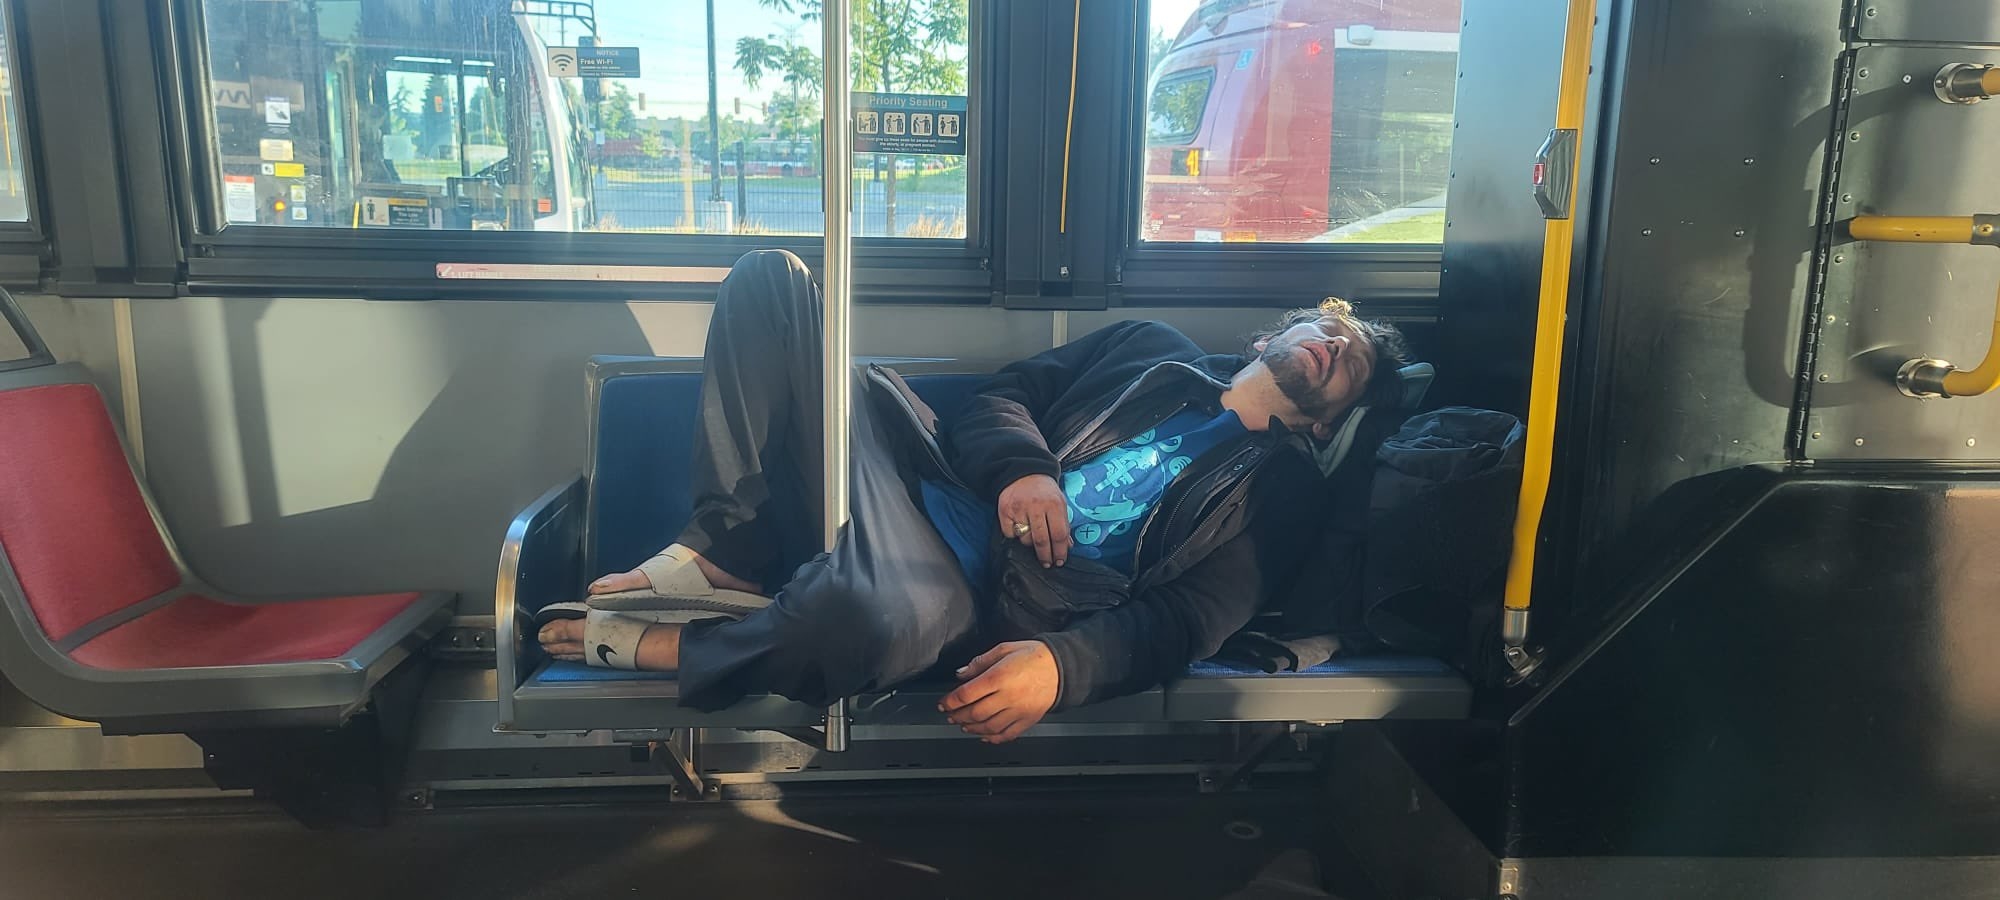 Sleepers Slow the Flow of Public Transit